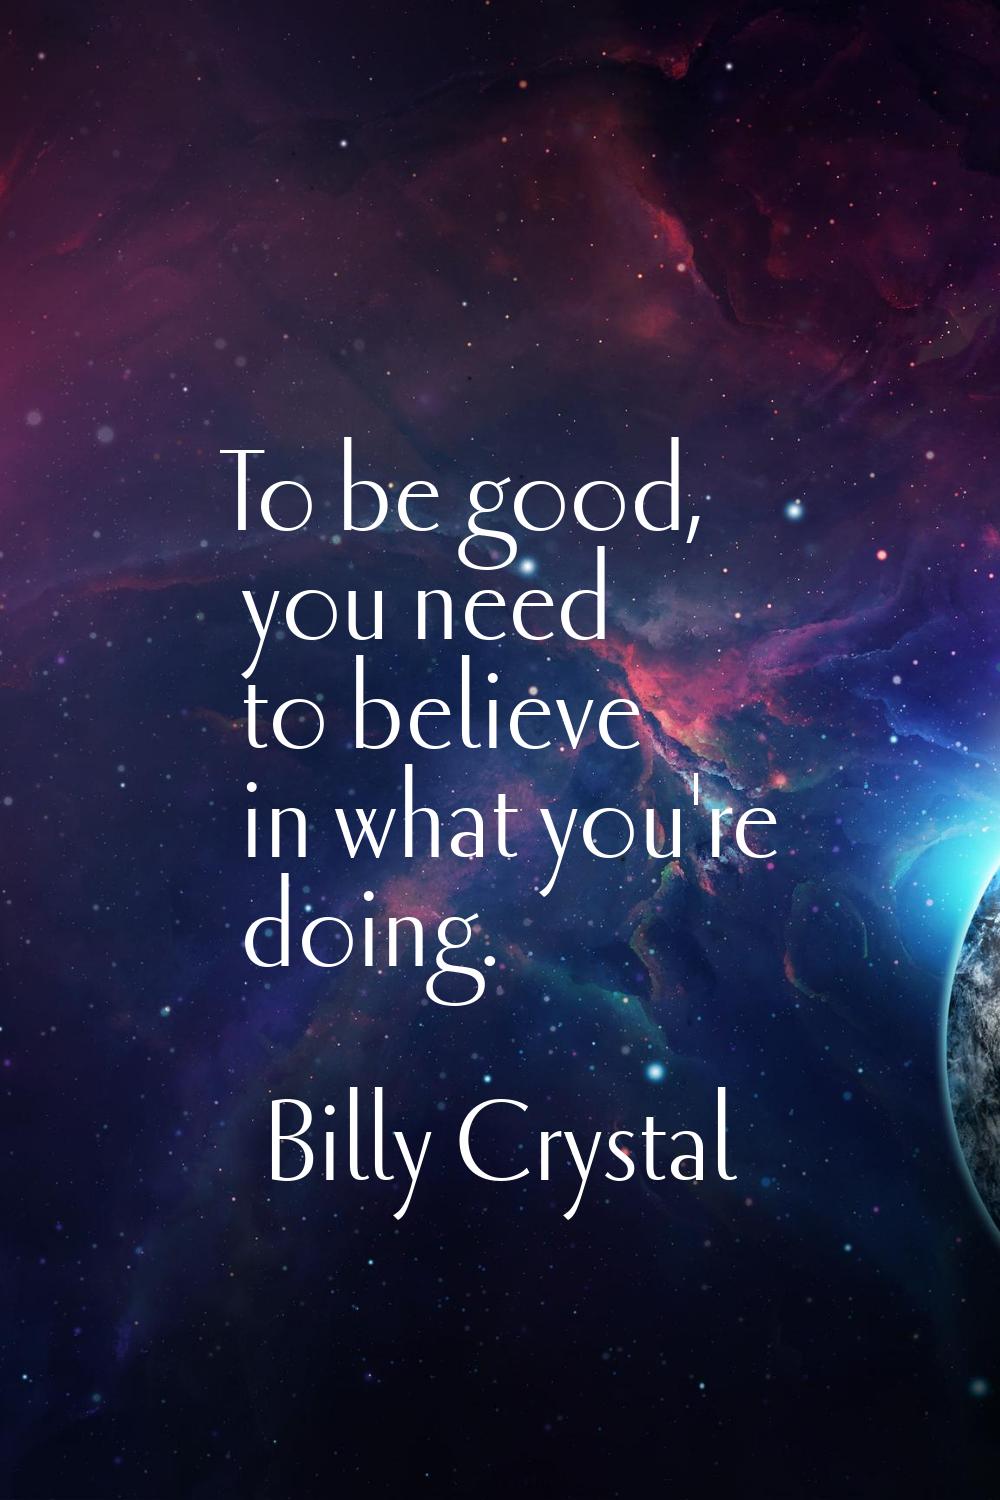 To be good, you need to believe in what you're doing.